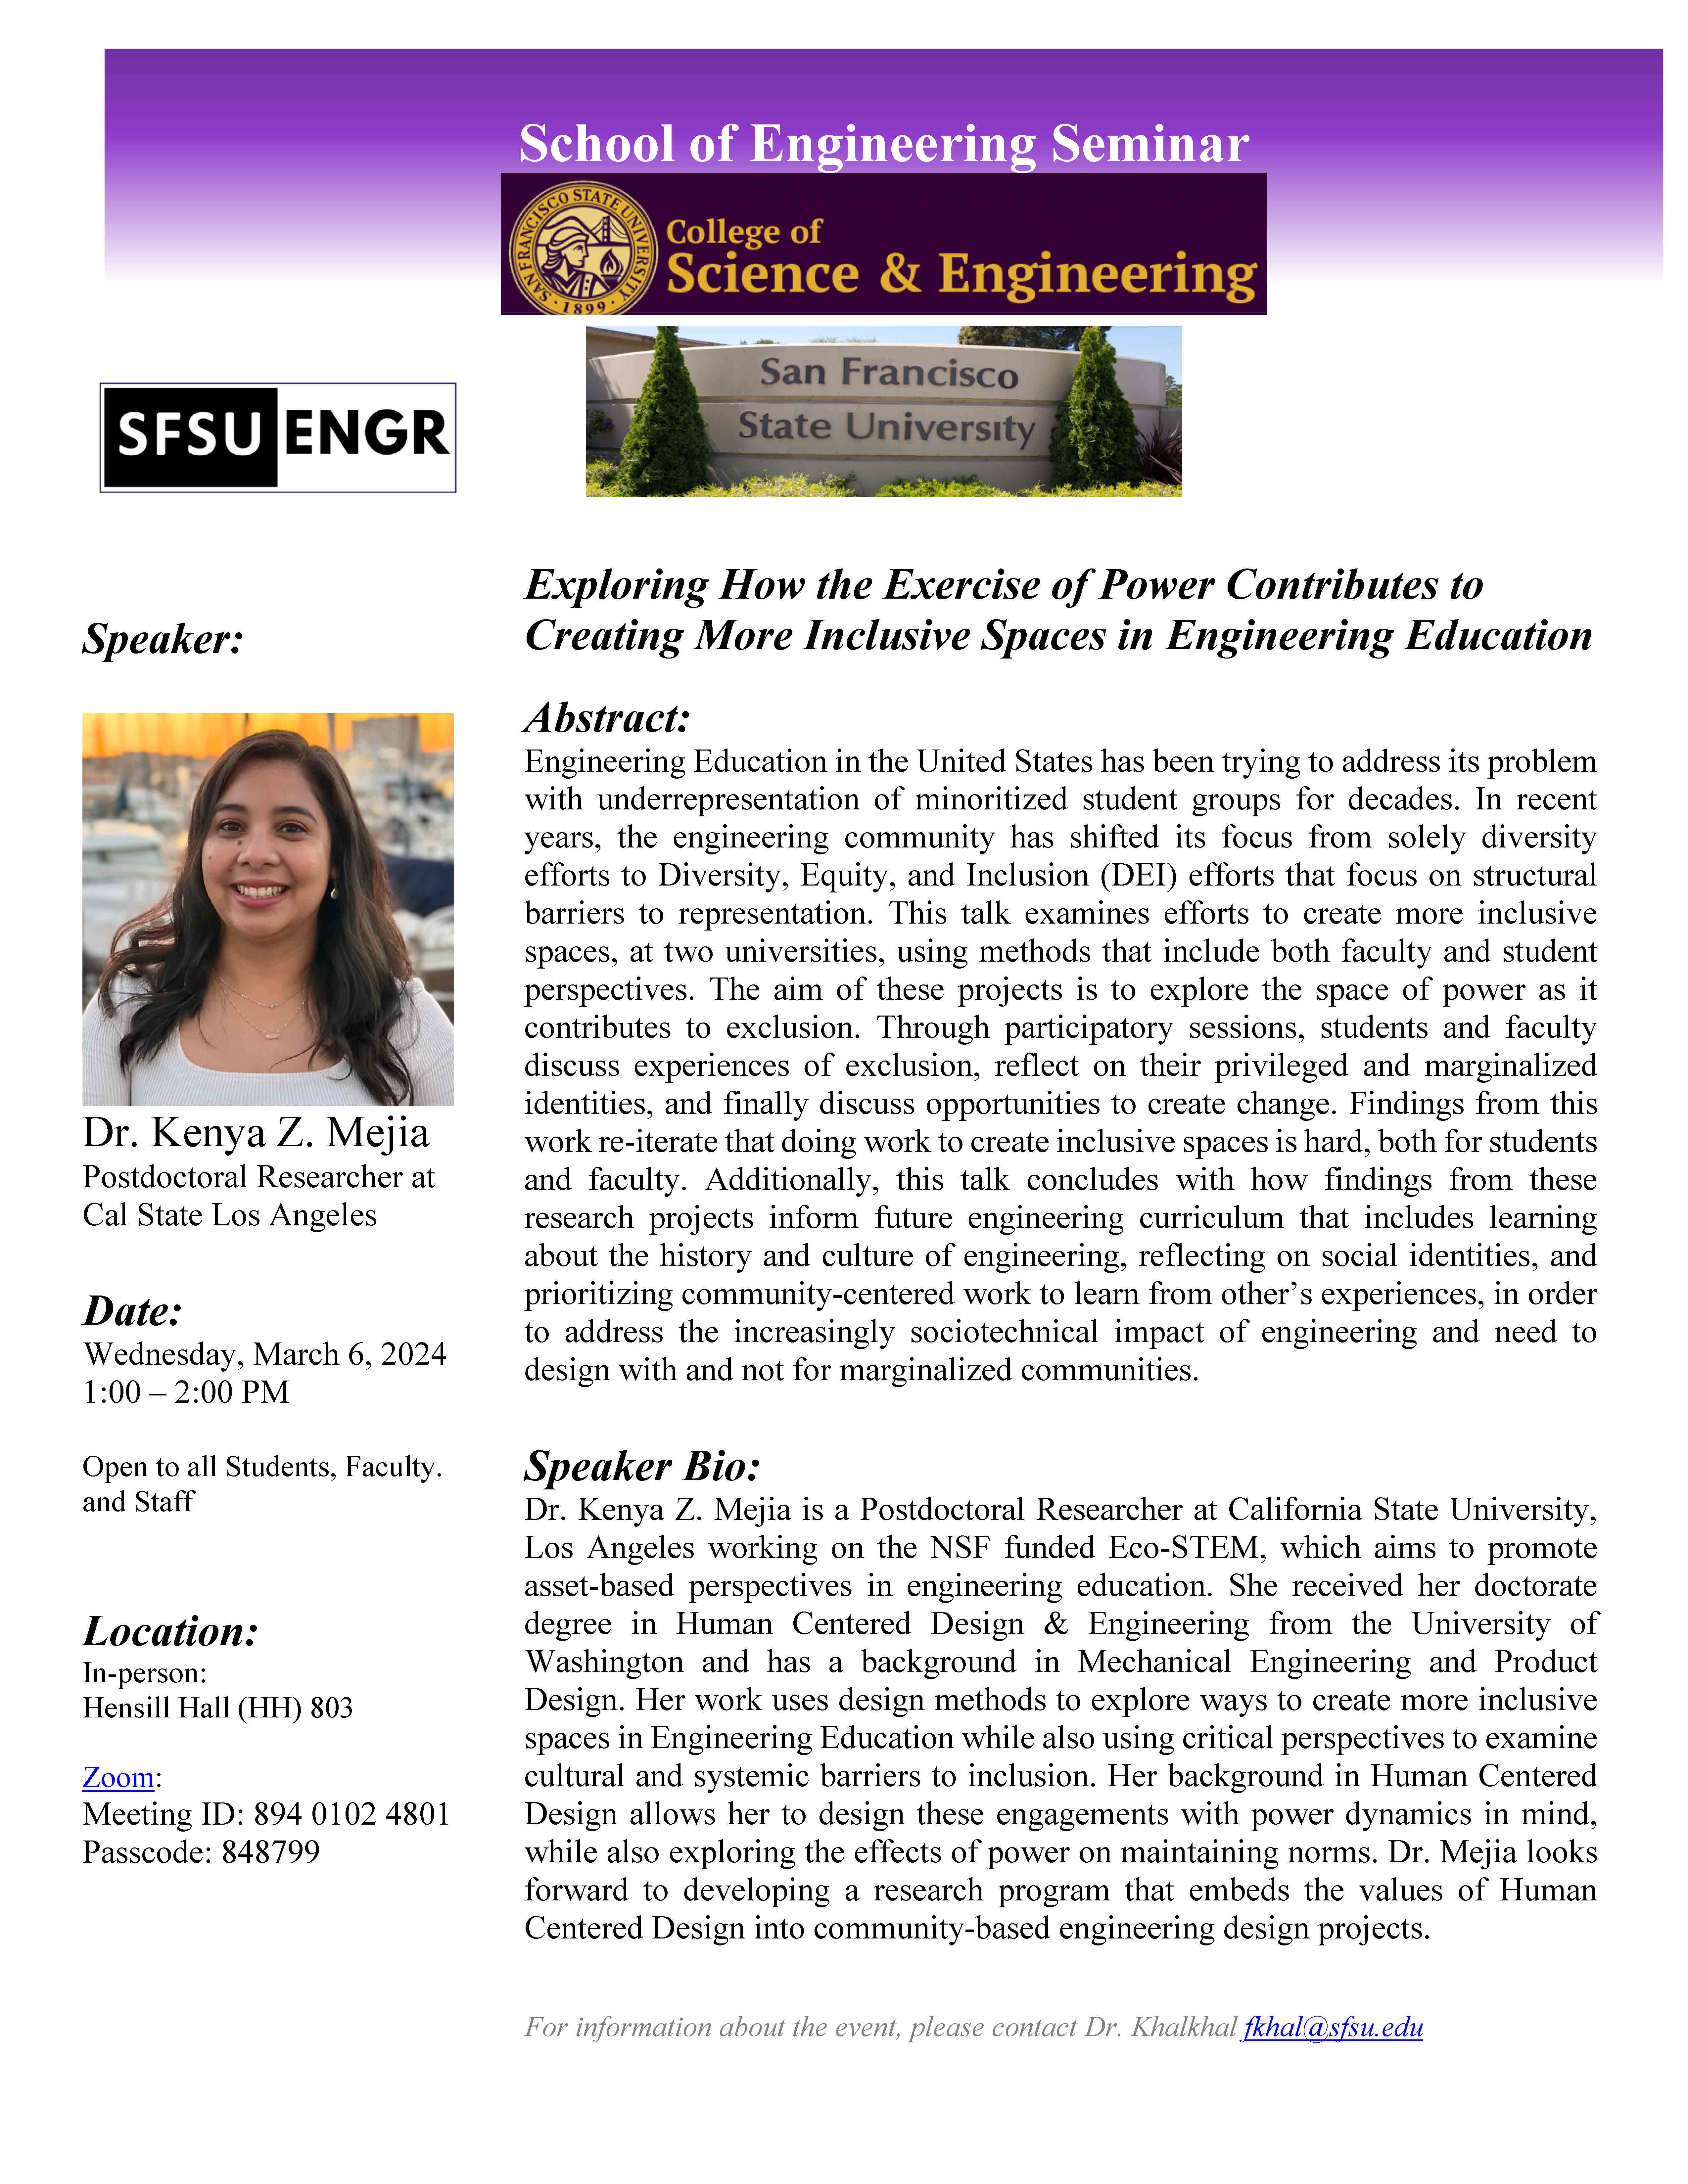 SFSU ENGR Mechanical Engineering Faculty Candidate Seminar Exploring How the Exercise of Power Contributes to Creating More Inclusive Spaces in Engineering Education by Dr. Kenya Mejia